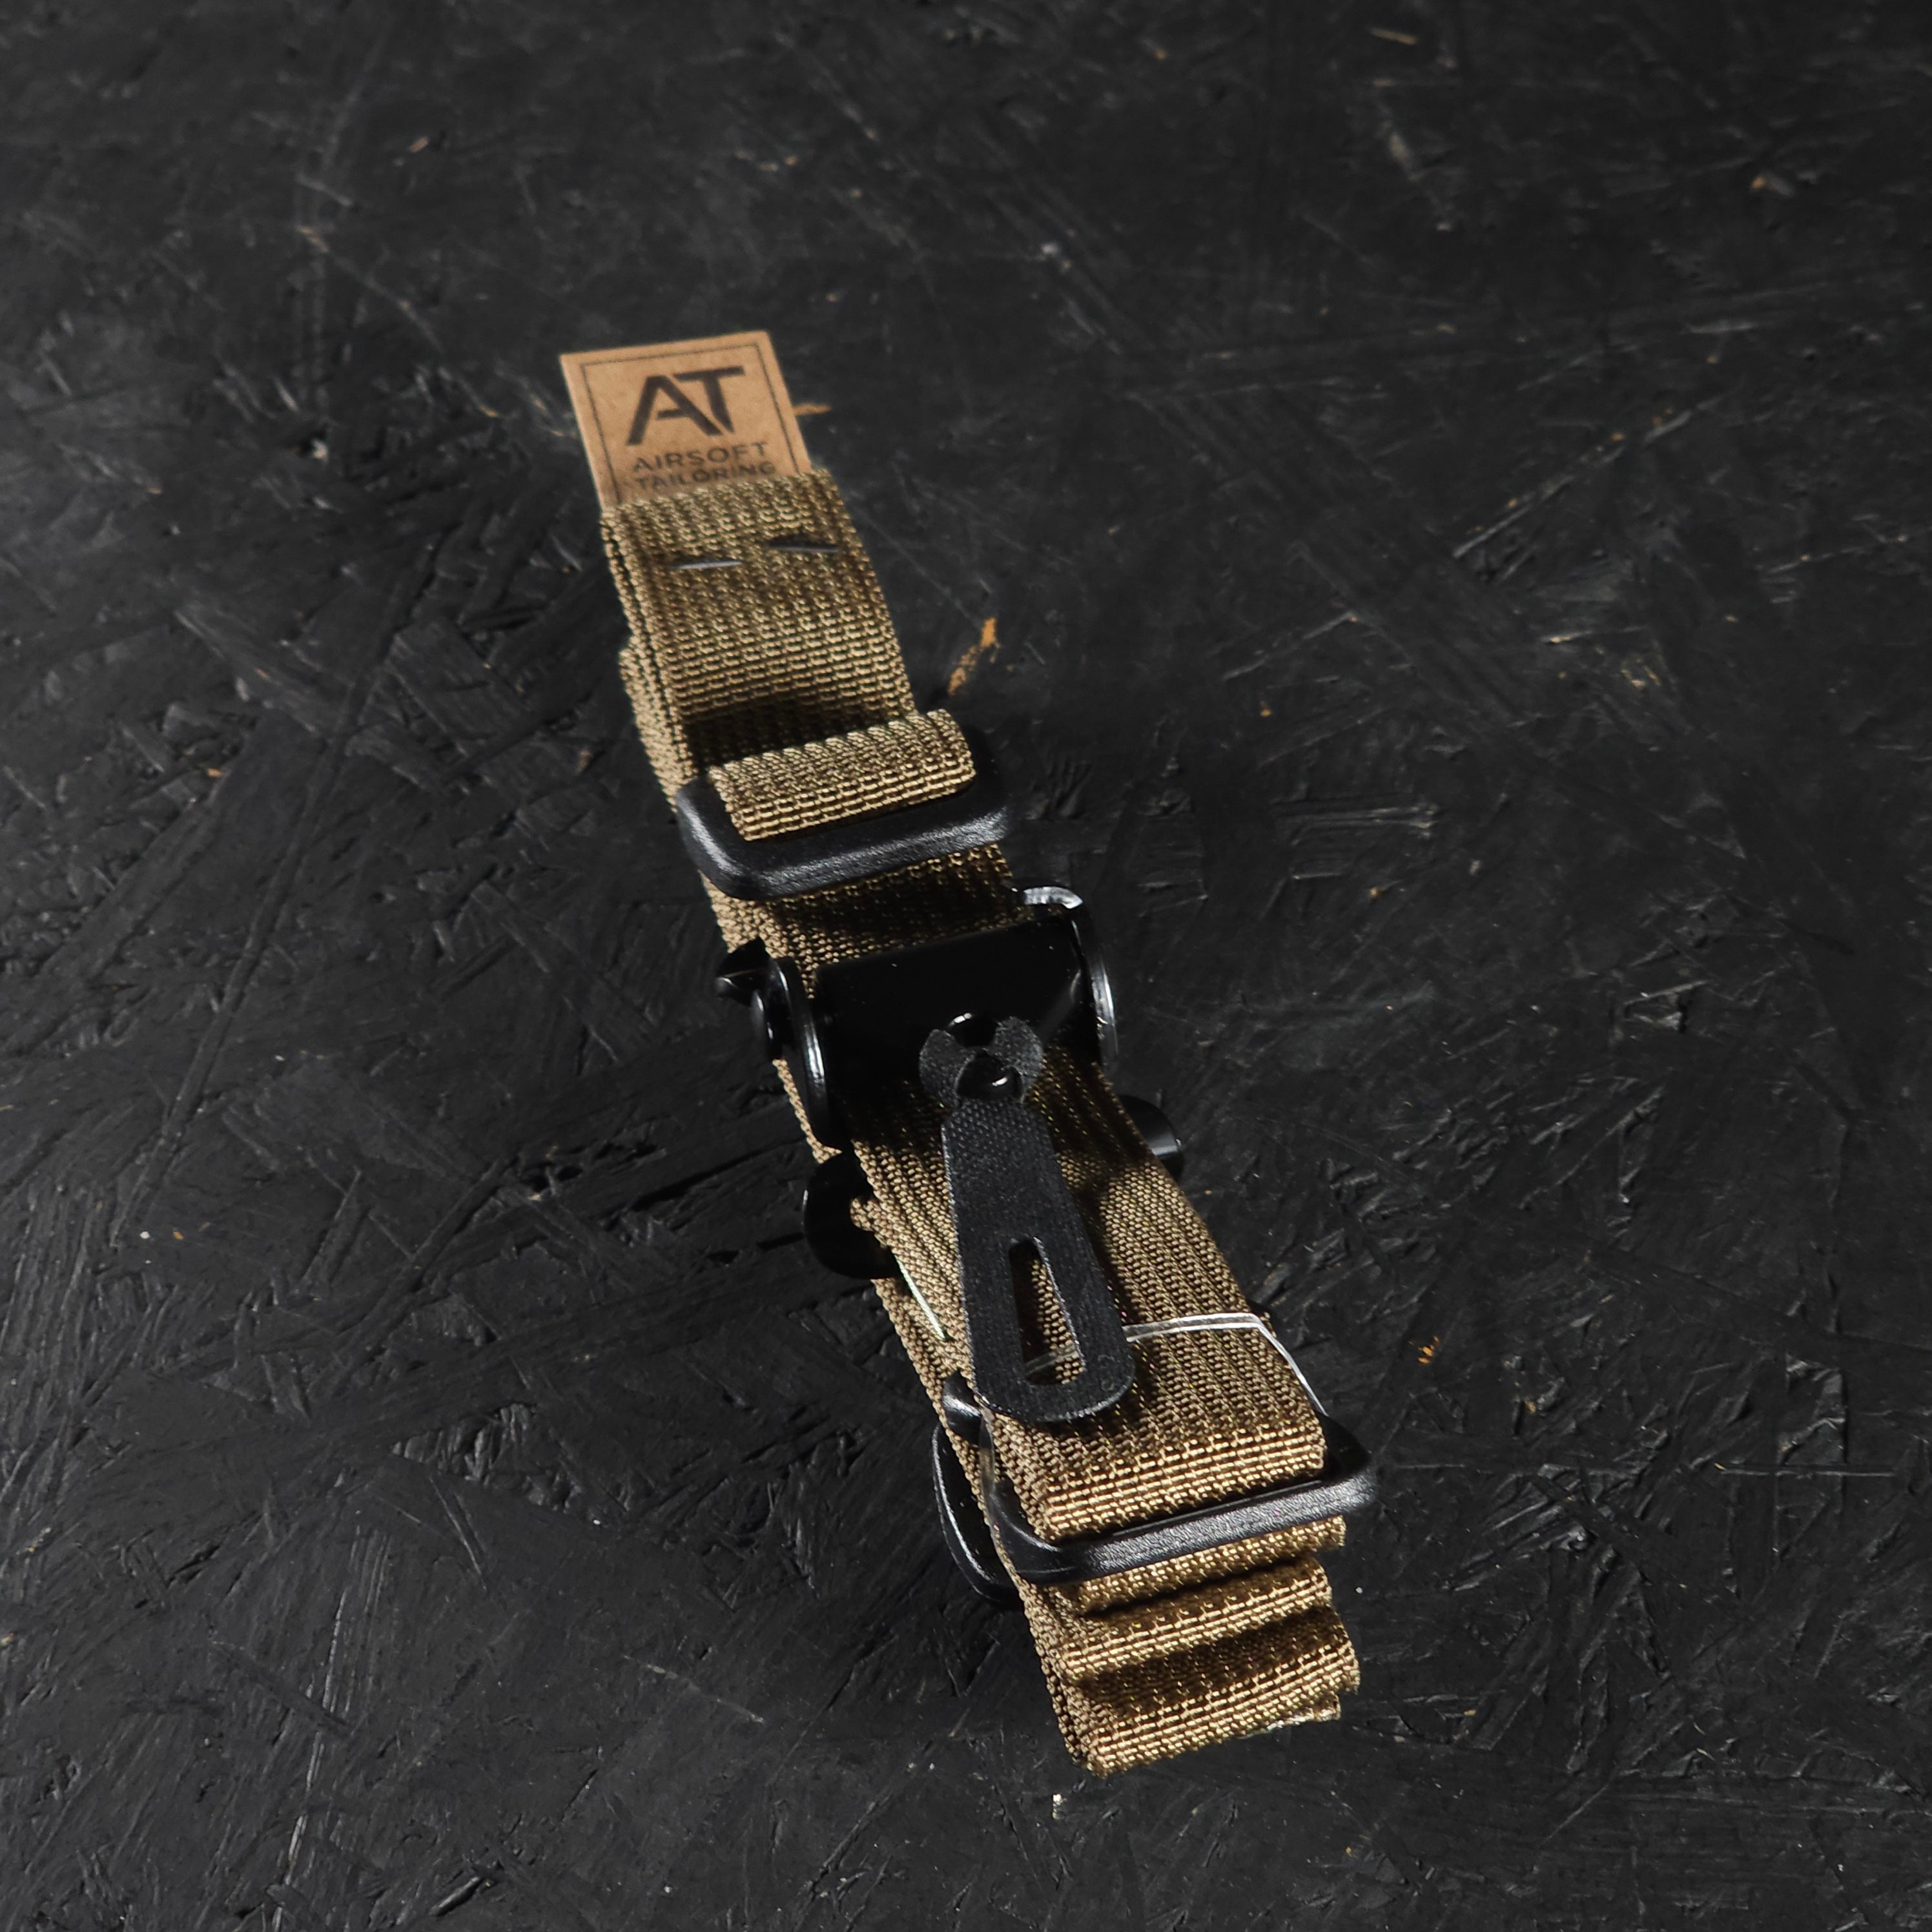 Quick Adjust Low Profile 2-Point Sling - AIRTACUK